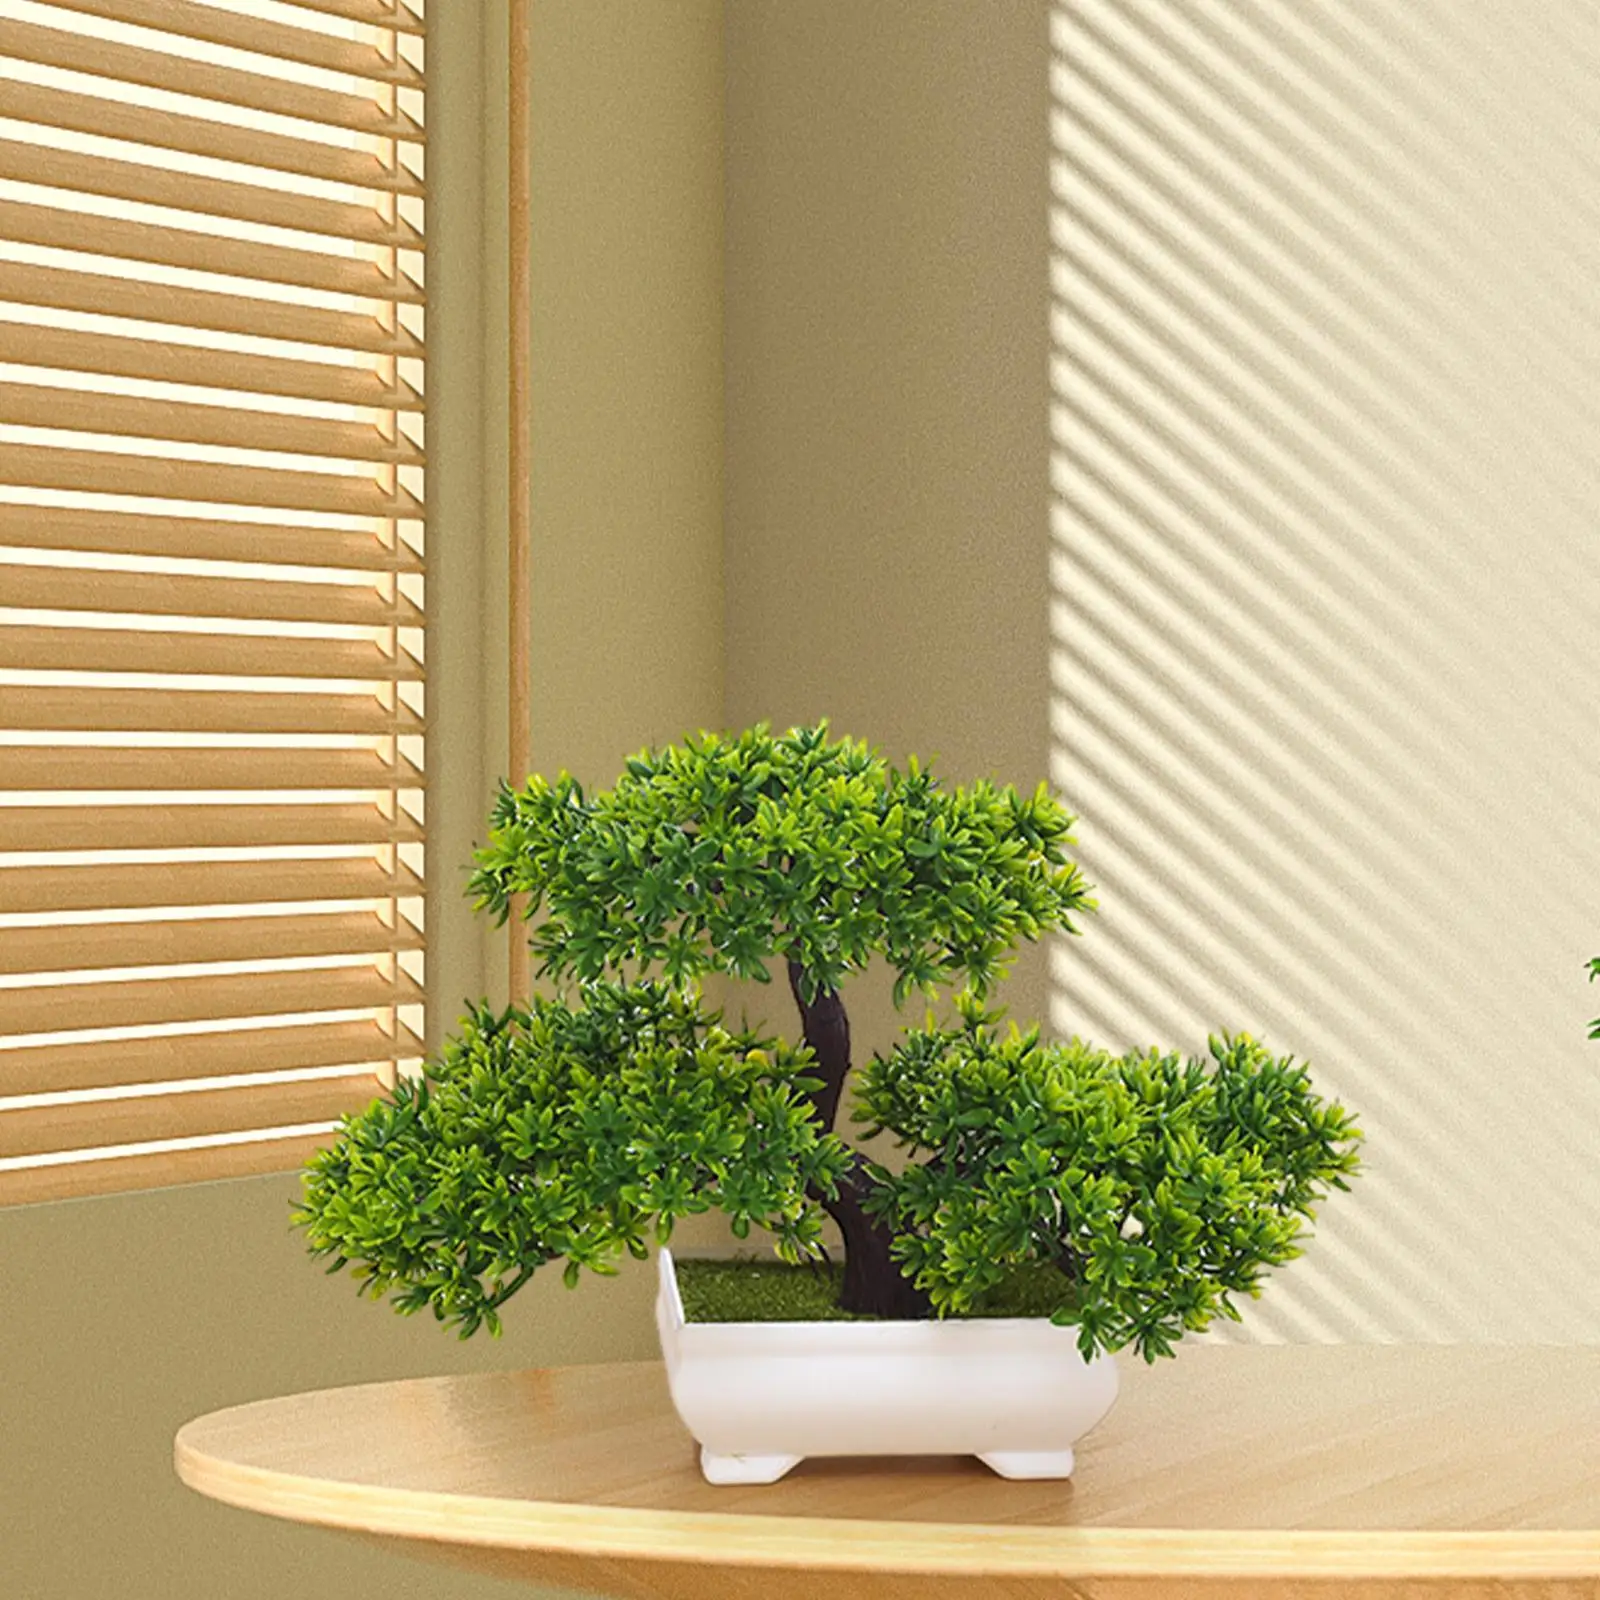 Artificial Bonsai Tree Zen Potted Japanese Pine Tree for Bedroom Farmhouse